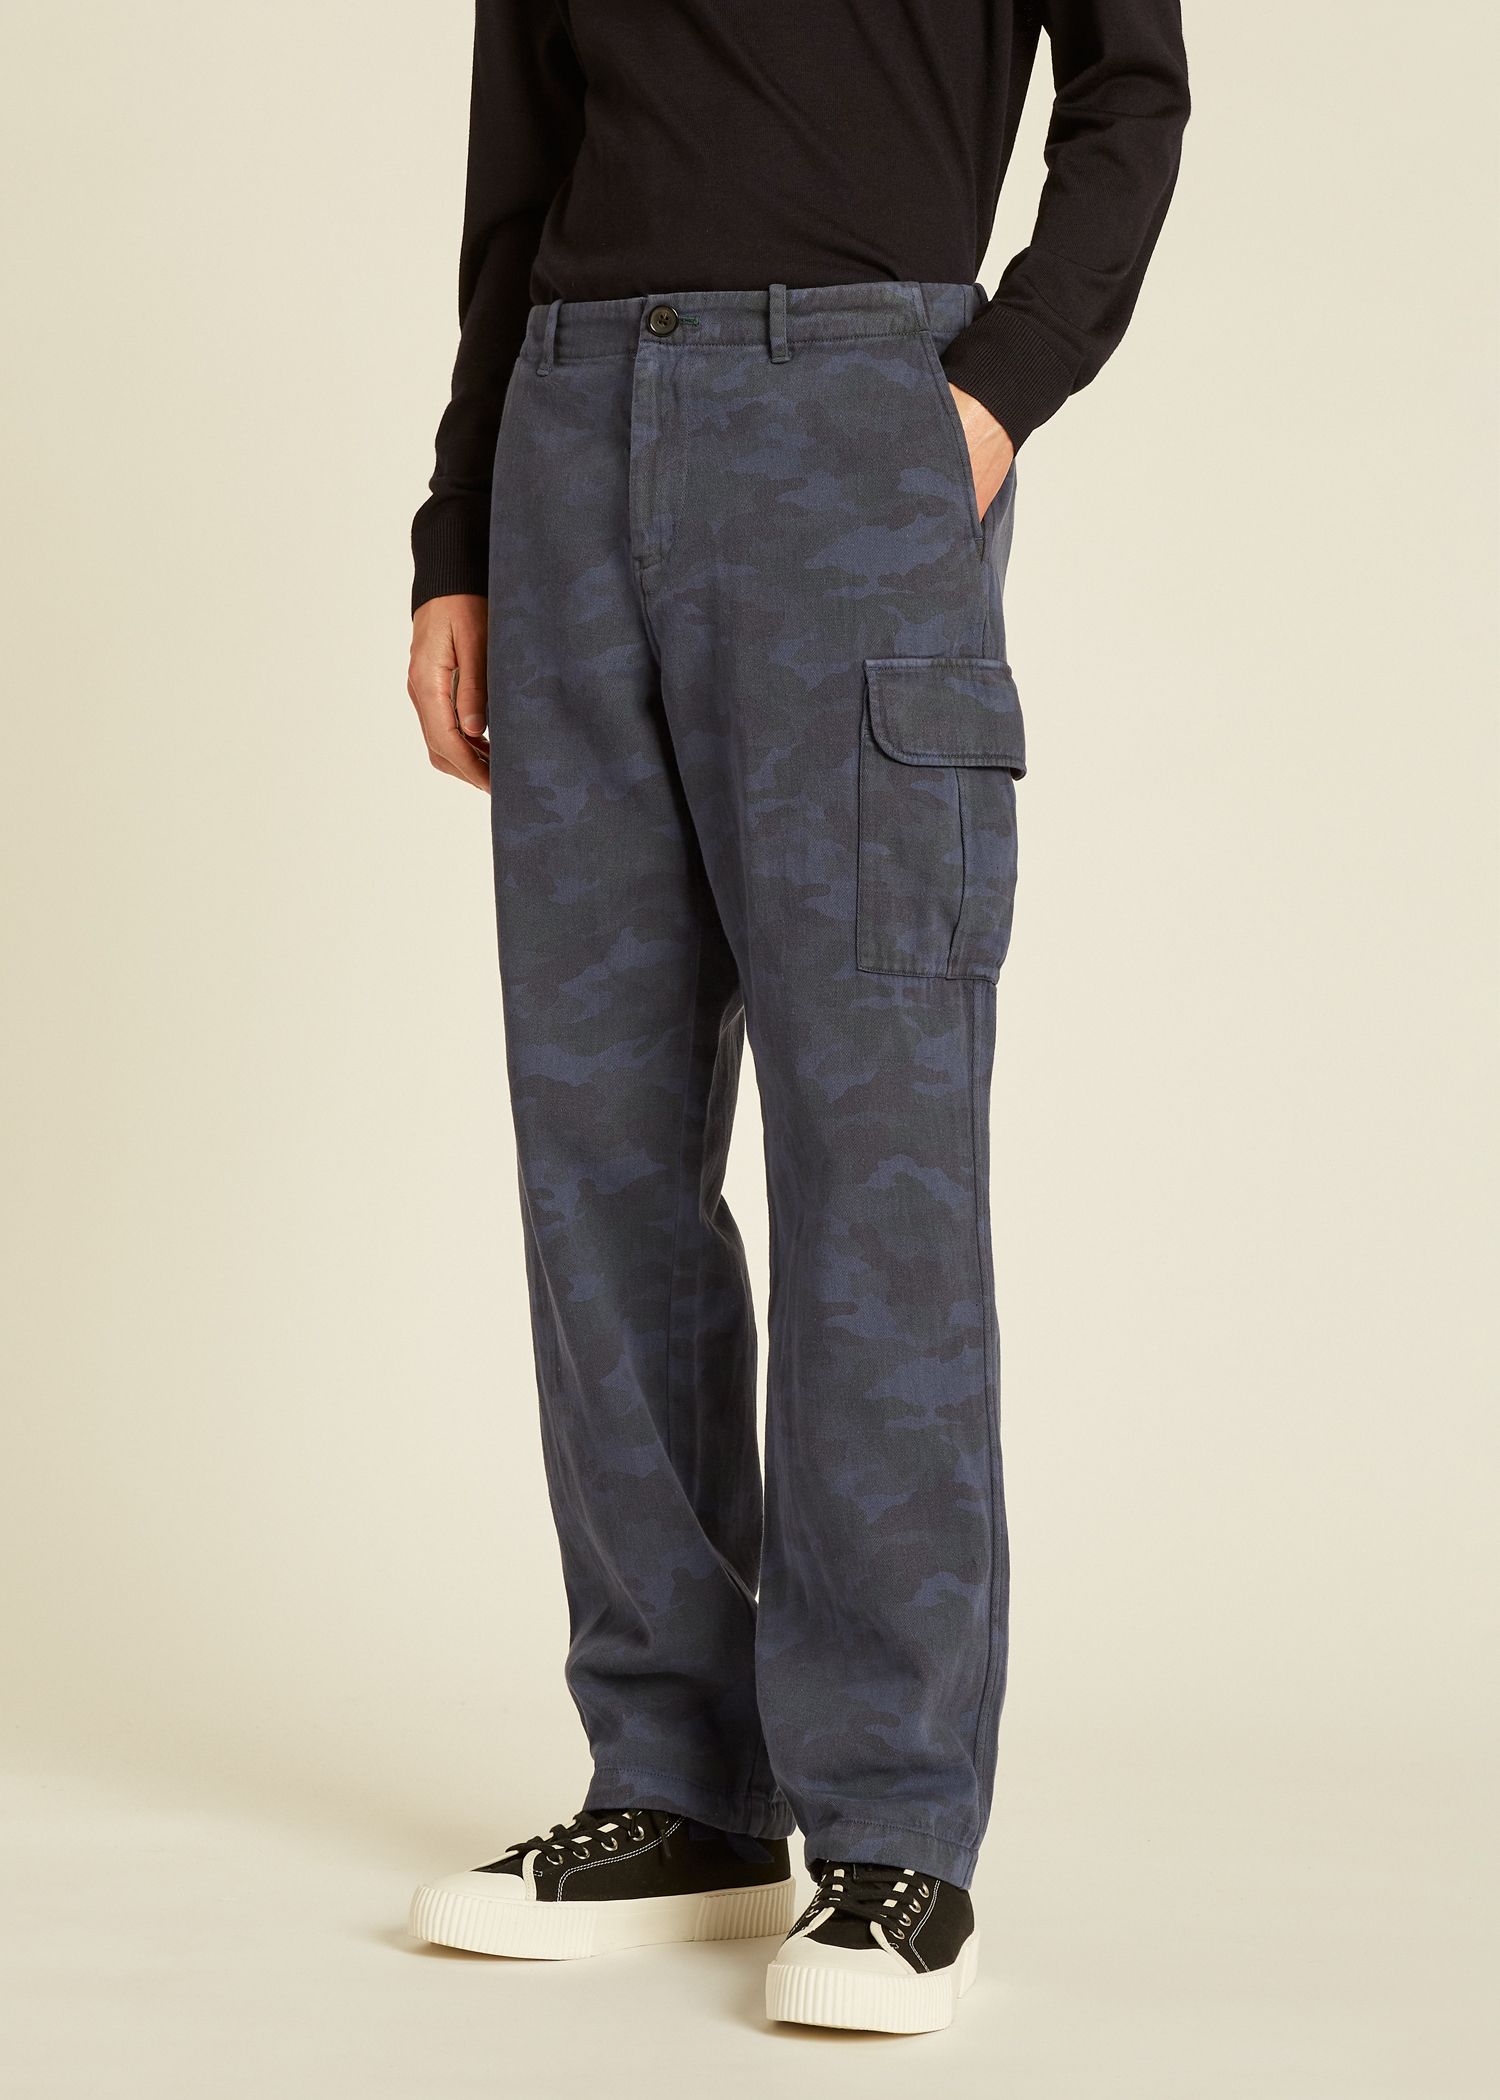 Paul Smith Trousers Slacks and Chinos for Men  Online Sale up to 70 off   Lyst UK